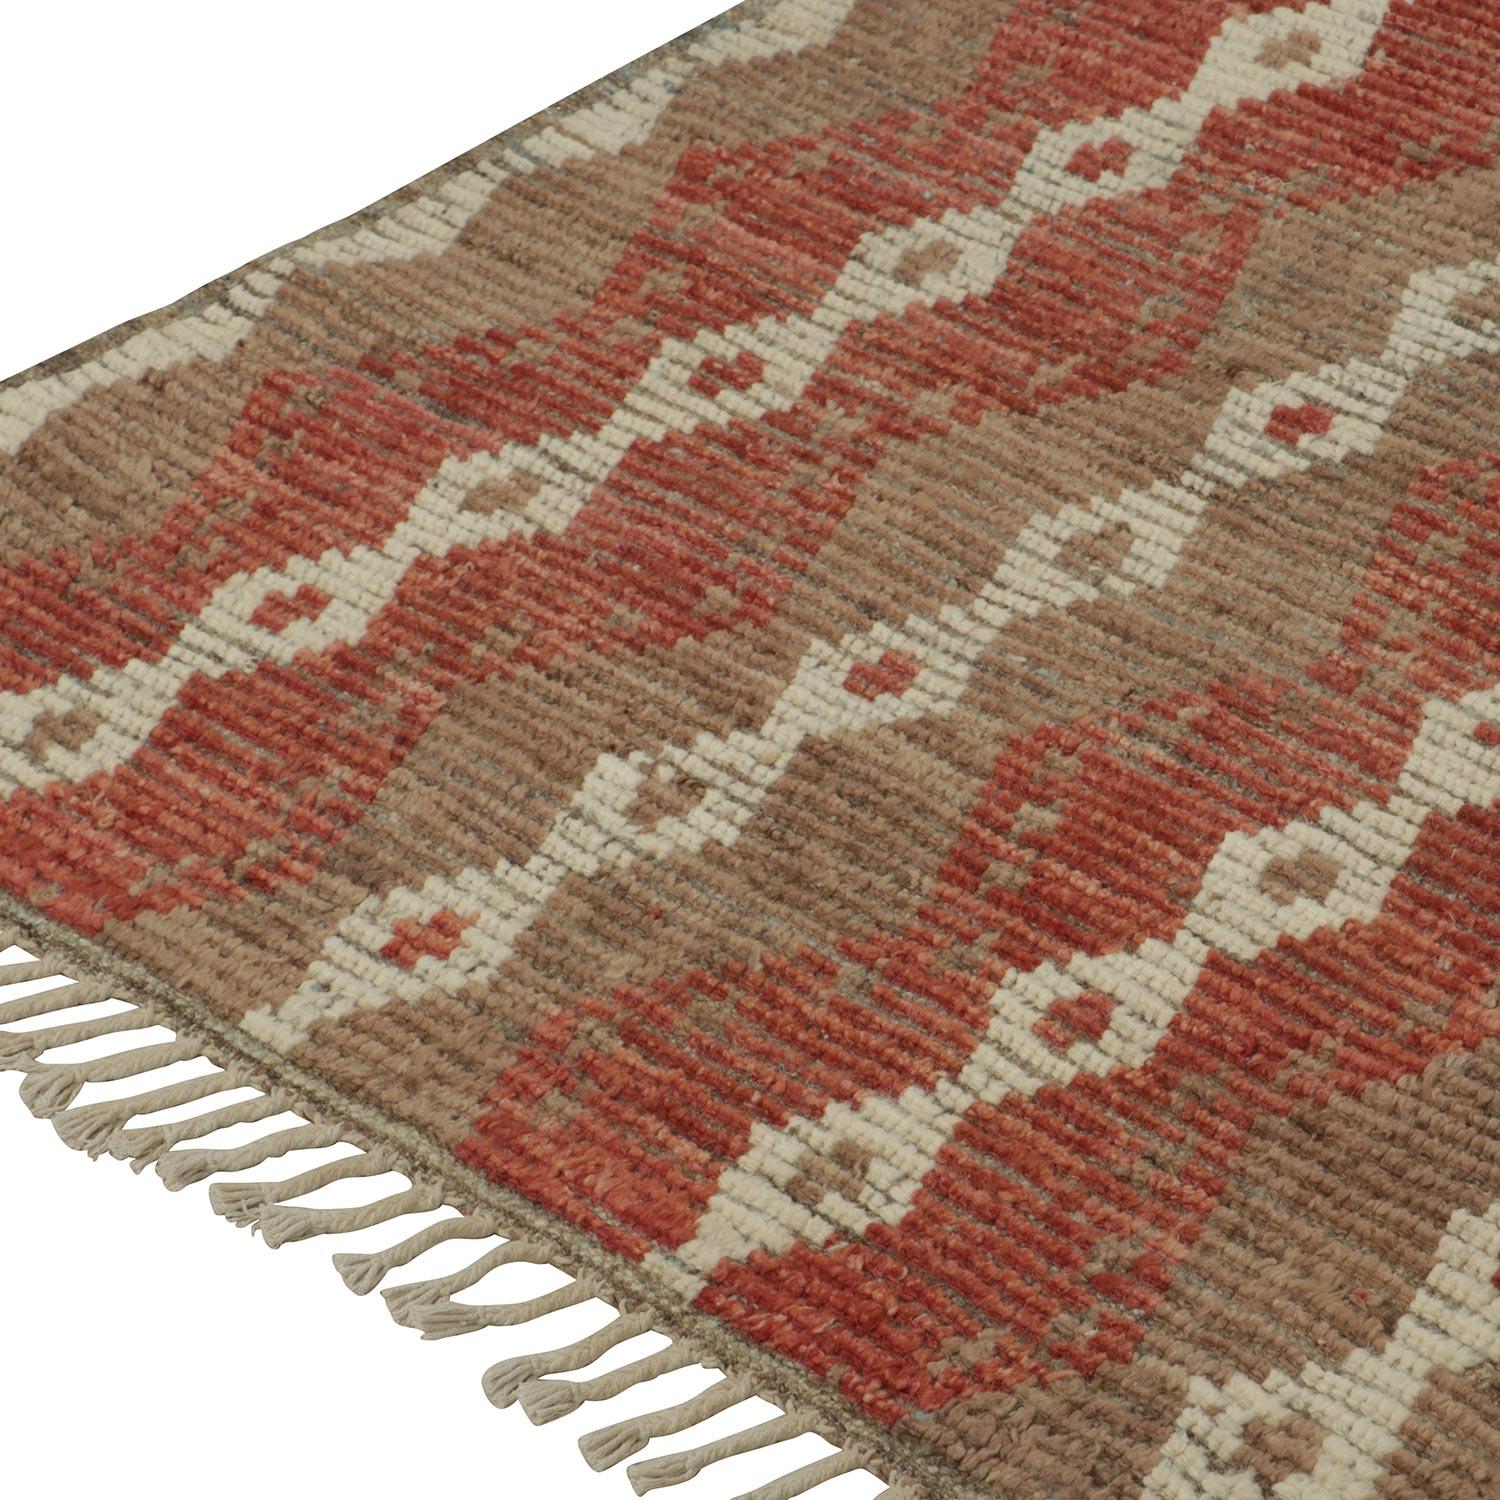 Linear form creates an intricate and elongated pattern filled with diamonds and stripes finished with a classic border in this Multi Moroccan Wool Rug - 8'3